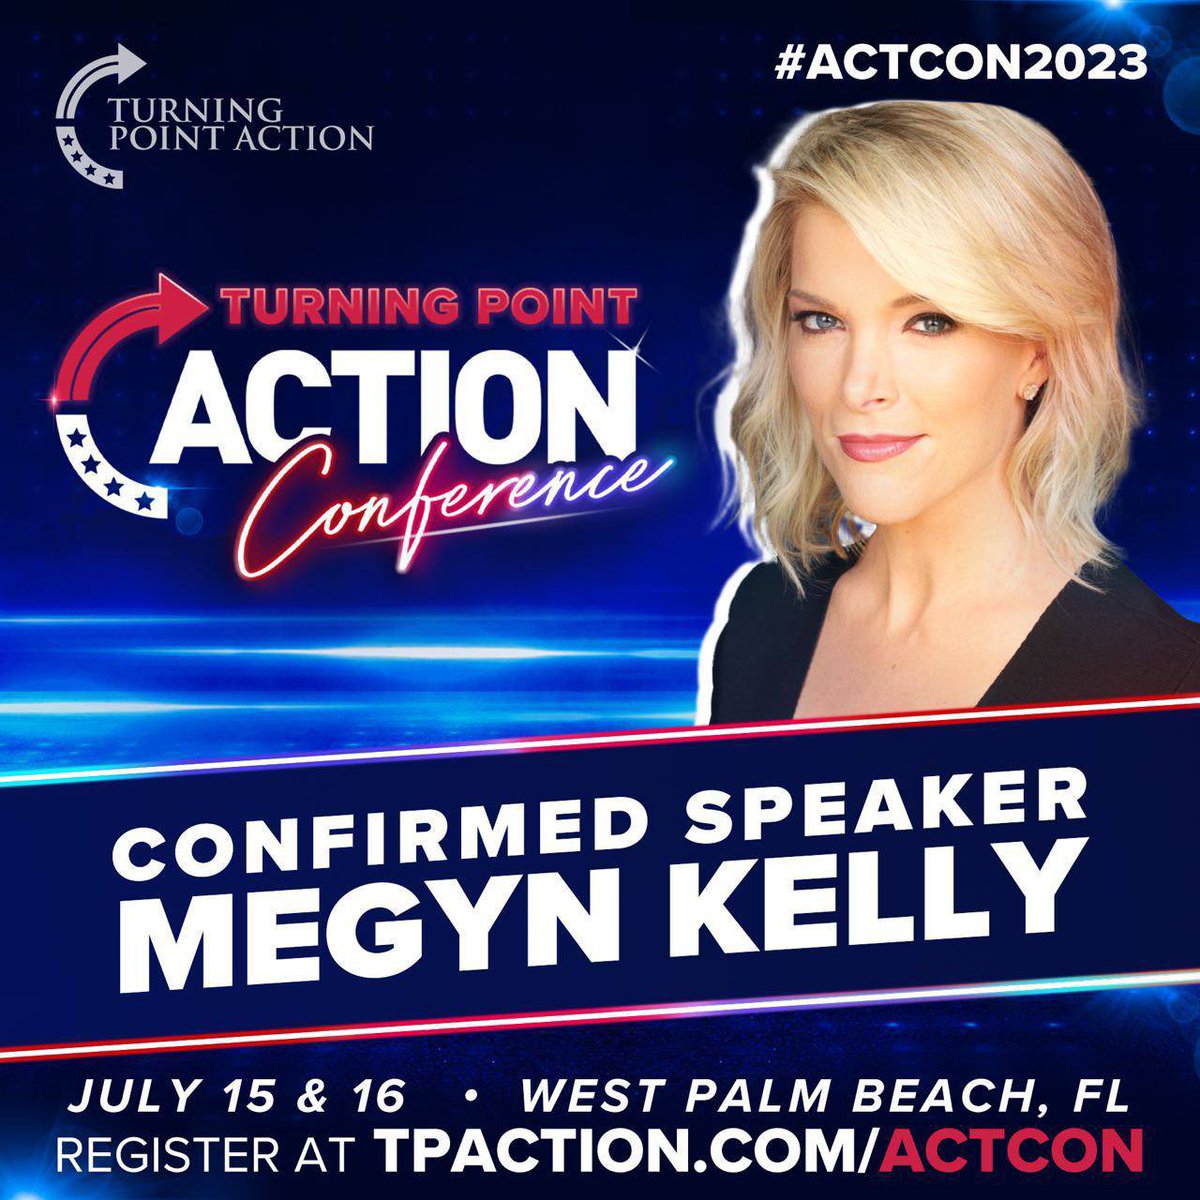 🚨🚨BREAKING🚨🚨

Turning Point Action is thrilled to announce that MEGYN KELLY is confirmed for #ACTCON2023

We’re only a month out from the biggest event of the summer! Be sure to grab your tickets today! ⬇️⬇️

TPACTION.com/ACTCON